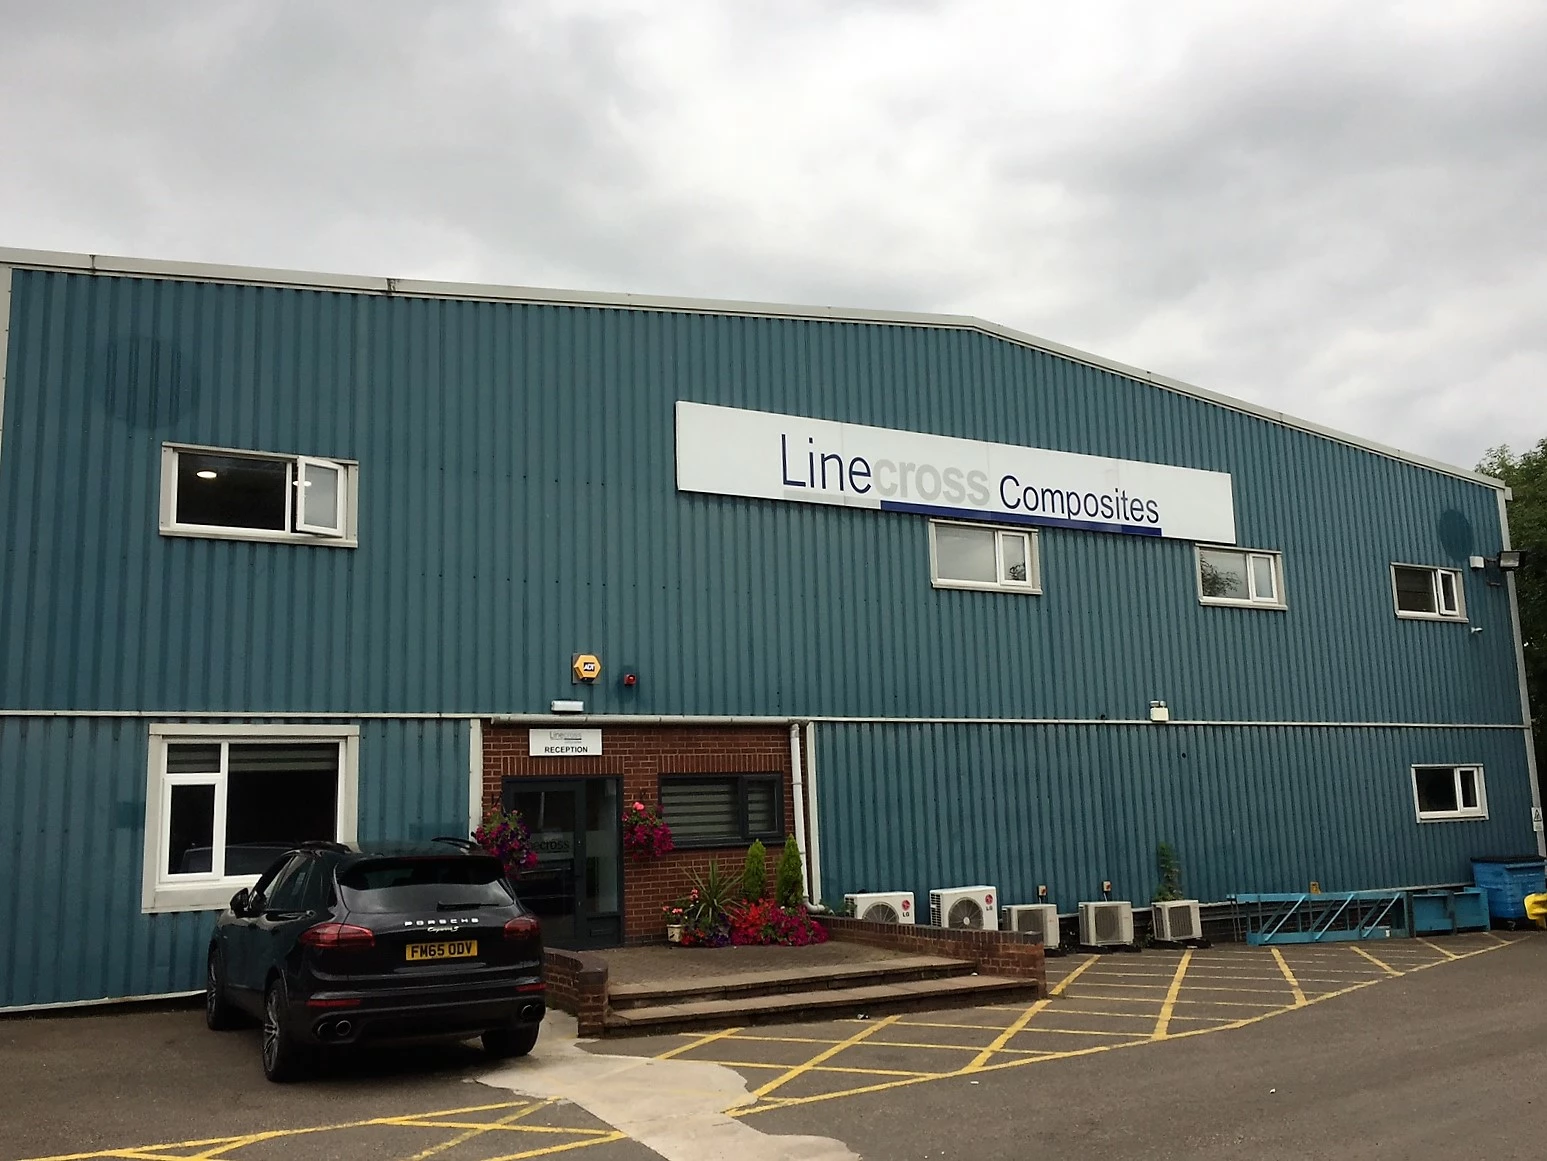 Linecross Composites' Cannock Site is undergoing a new phase of expansion.